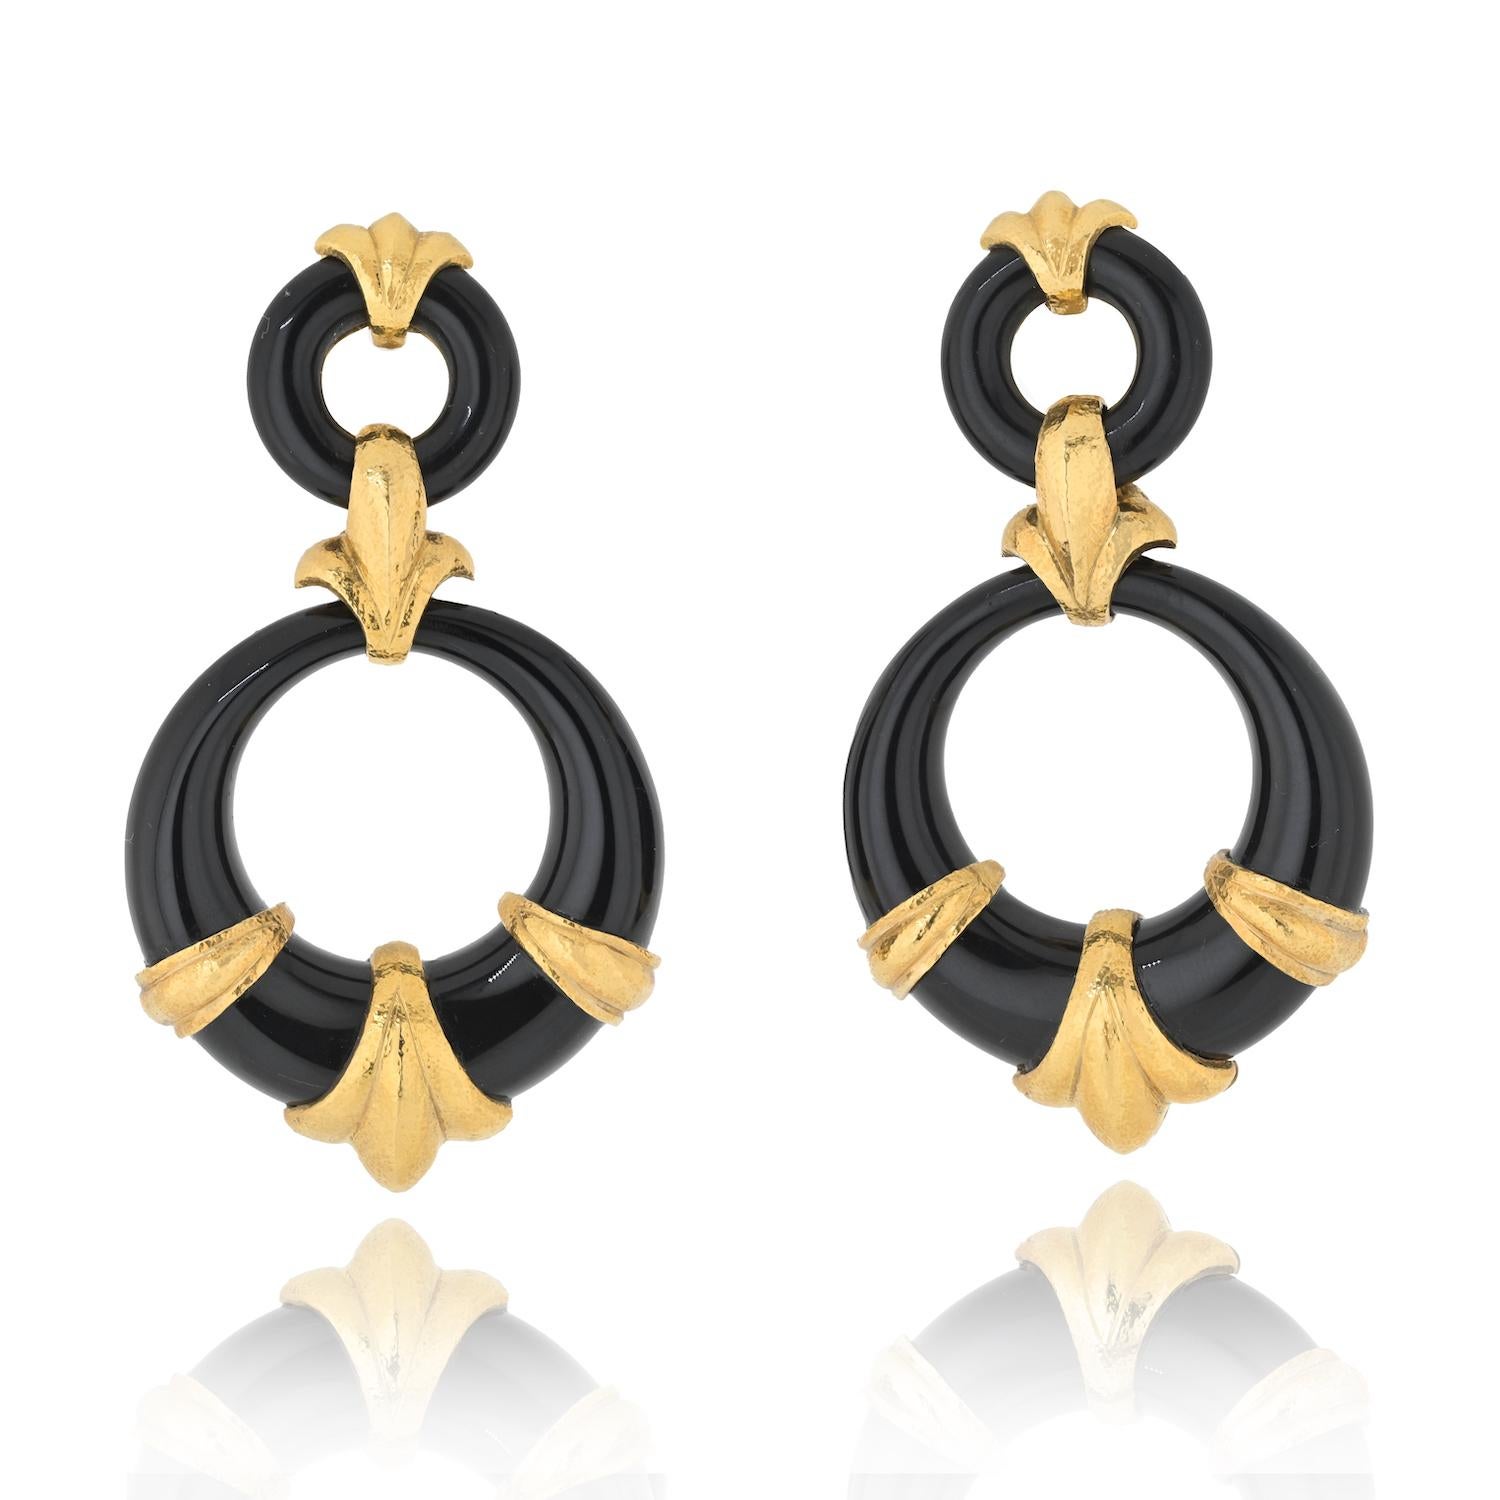 Introducing a stunning pair of estate Fleur-de-Lis Hoop Earrings from David Webb's Ancient World collection. These captivating earrings are a perfect blend of vintage elegance and contemporary flair.

Measuring 2.25 inches in length, these hoop